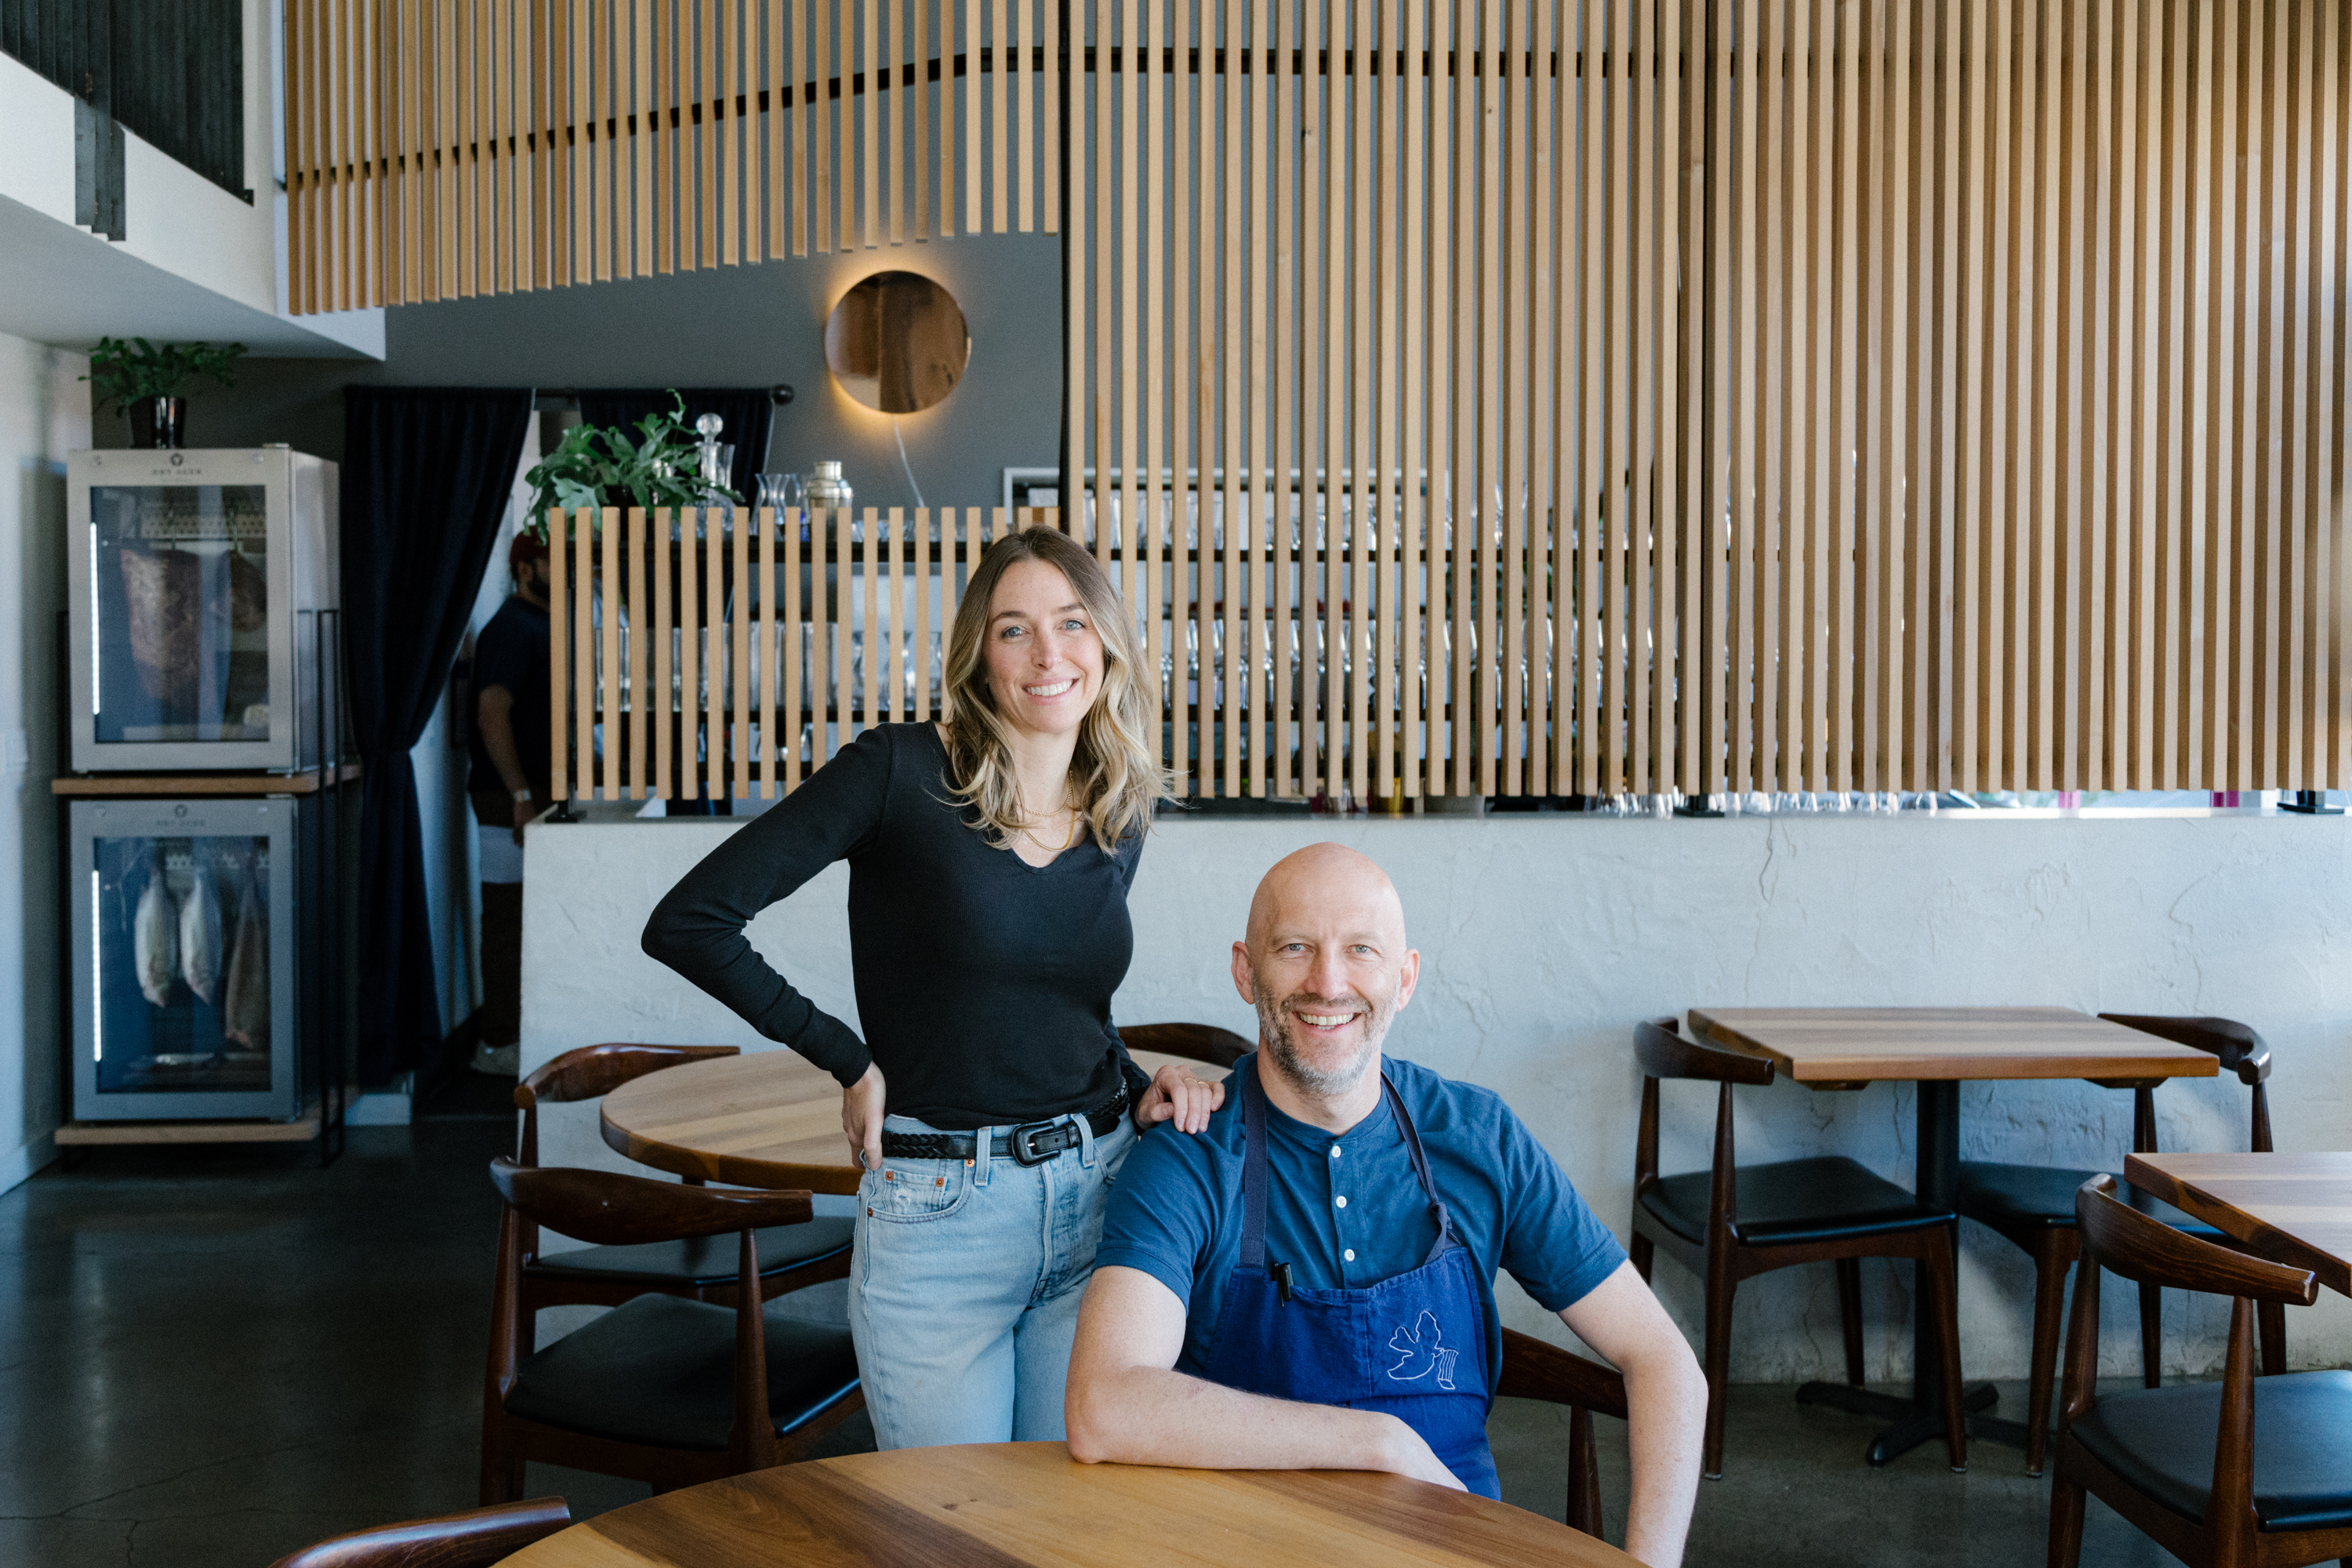 Lord Stanley owners Rupert and Carrie Bleaset pose for a photo in the modern dining room of Asian-inspired French bistro restaurant Lord Stanley in San Francisco, California.